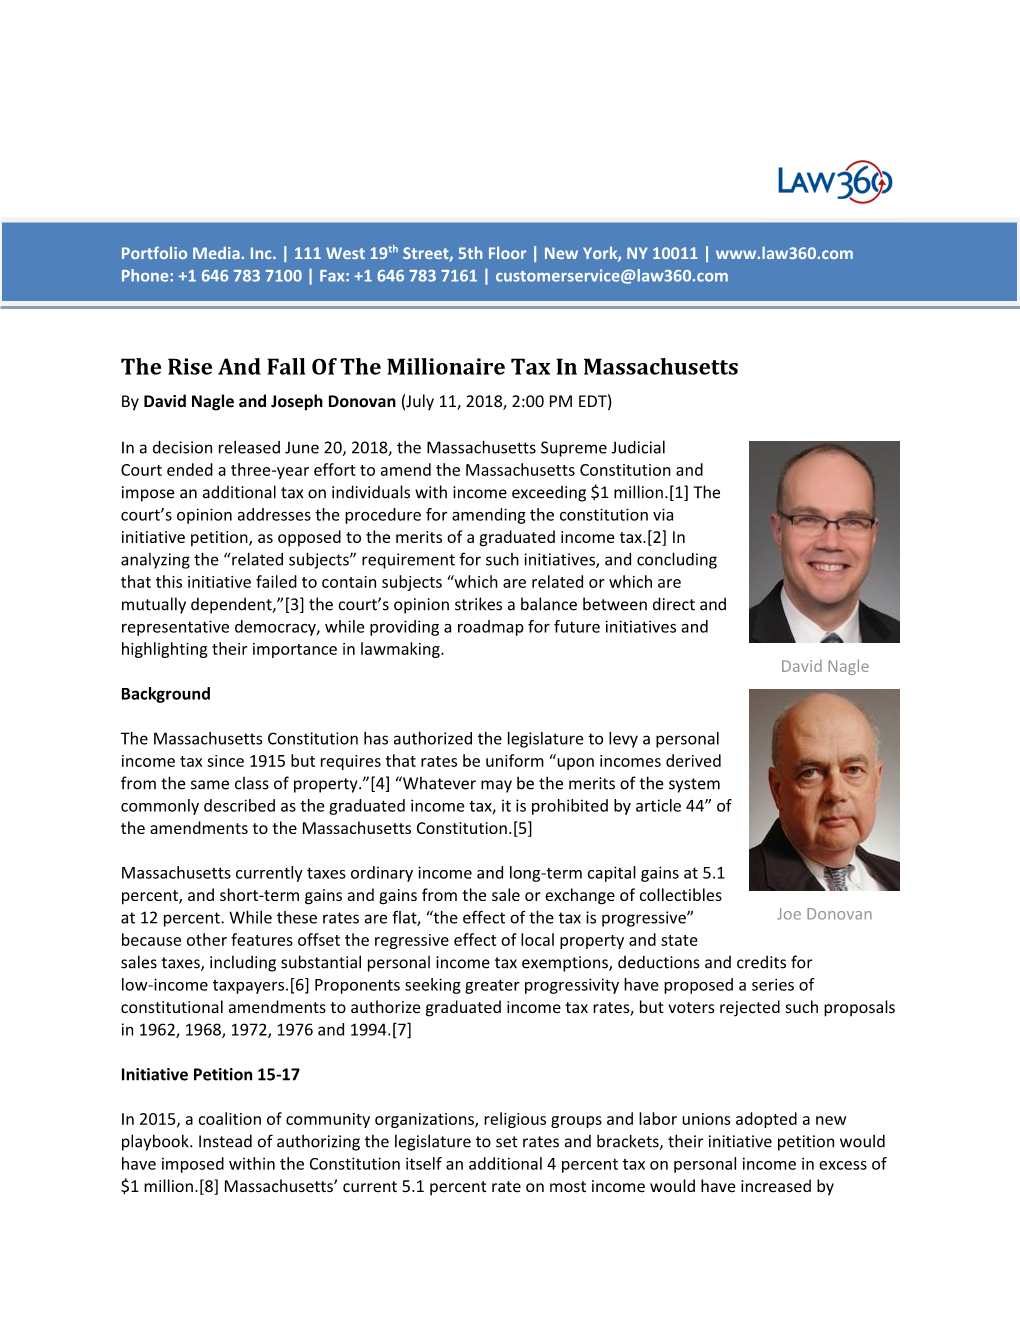 The Rise and Fall of the Millionaire Tax in Massachusetts by David Nagle and Joseph Donovan (July 11, 2018, 2:00 PM EDT)